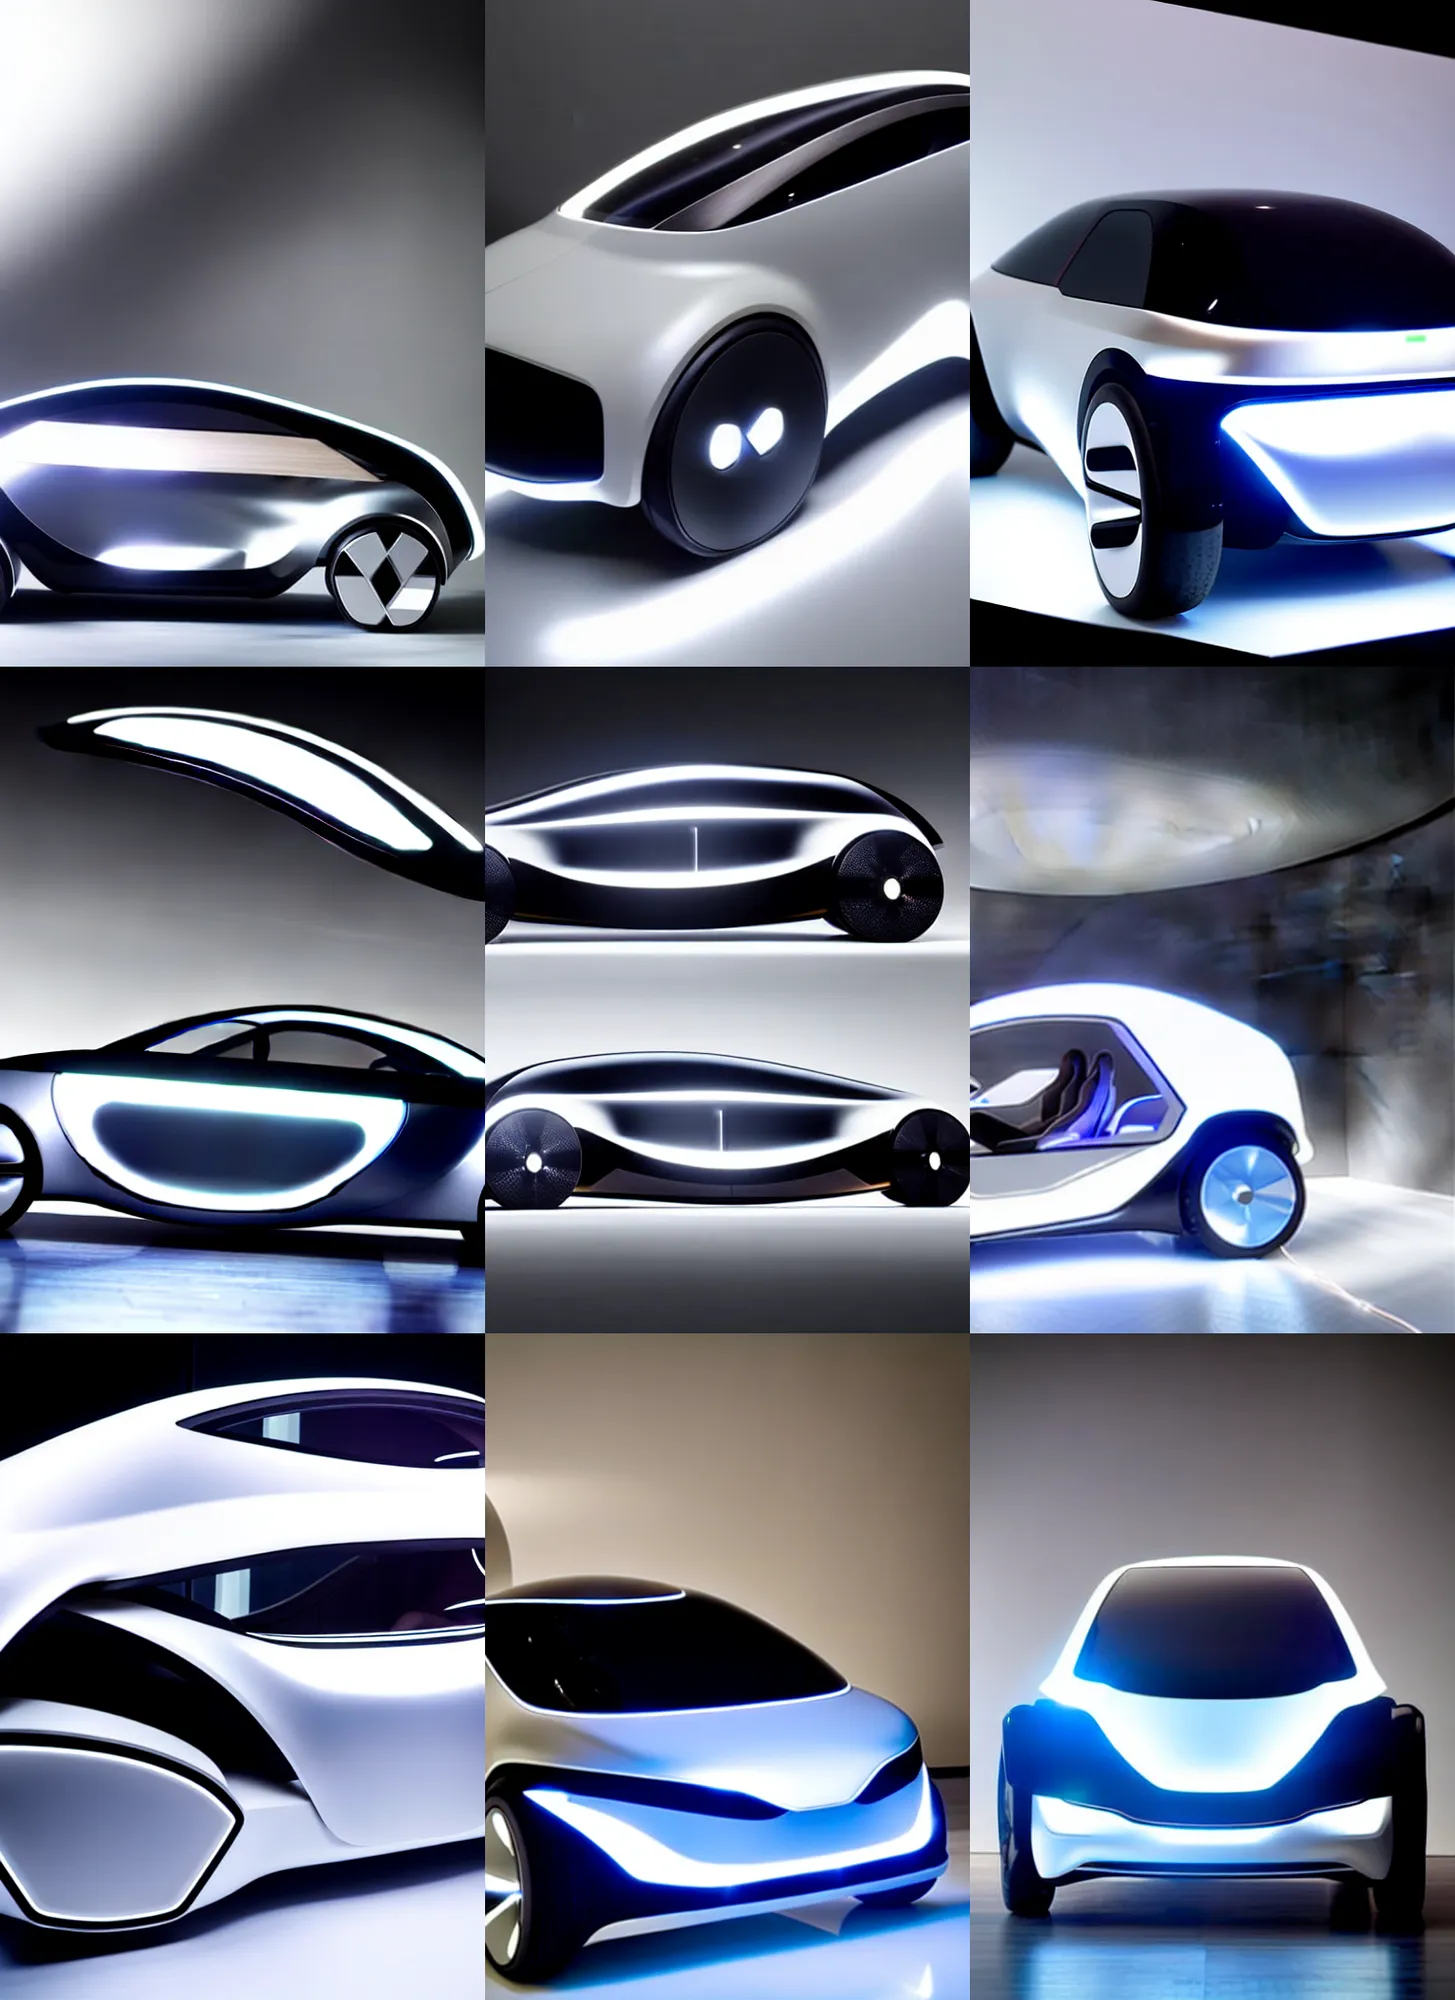 Prompt: a high - tech modern lustrous fashion ( future city car concept ) designed by modern architecture : : oak, glass, brushed aluminum, tasteful oled strip accent lighting : : side view!!!